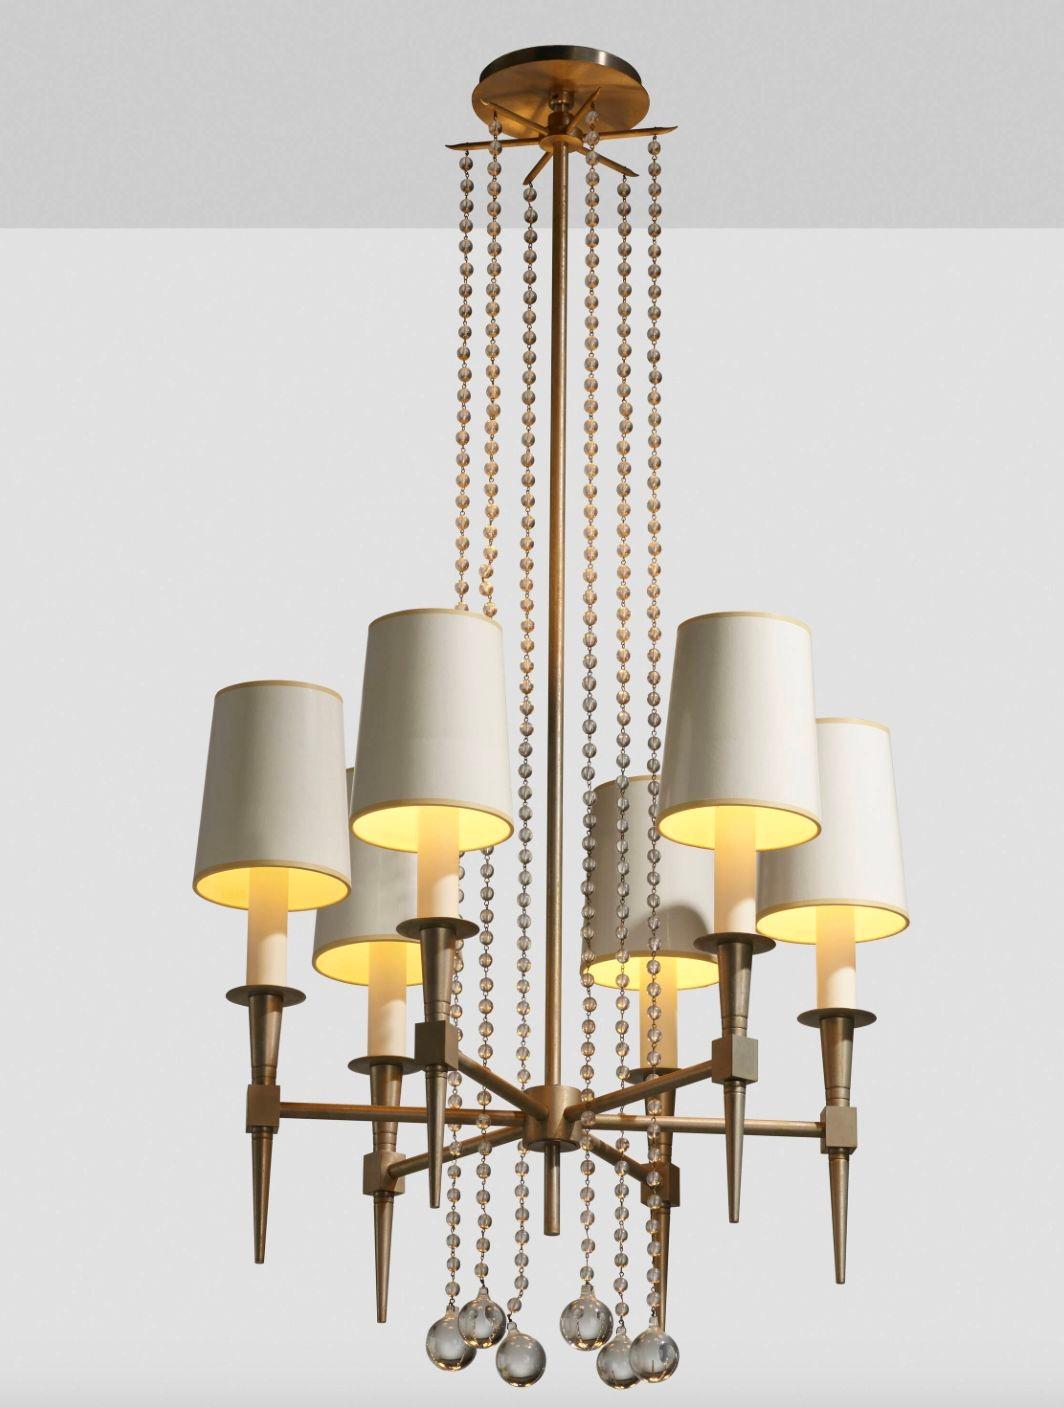 Tommi Parzinger Chandelier for Parzinger Originals, Six-arm light source with individual shades
USA, c. 1955
zinc-plated brass, paper, glass
Dimensions:

40.75